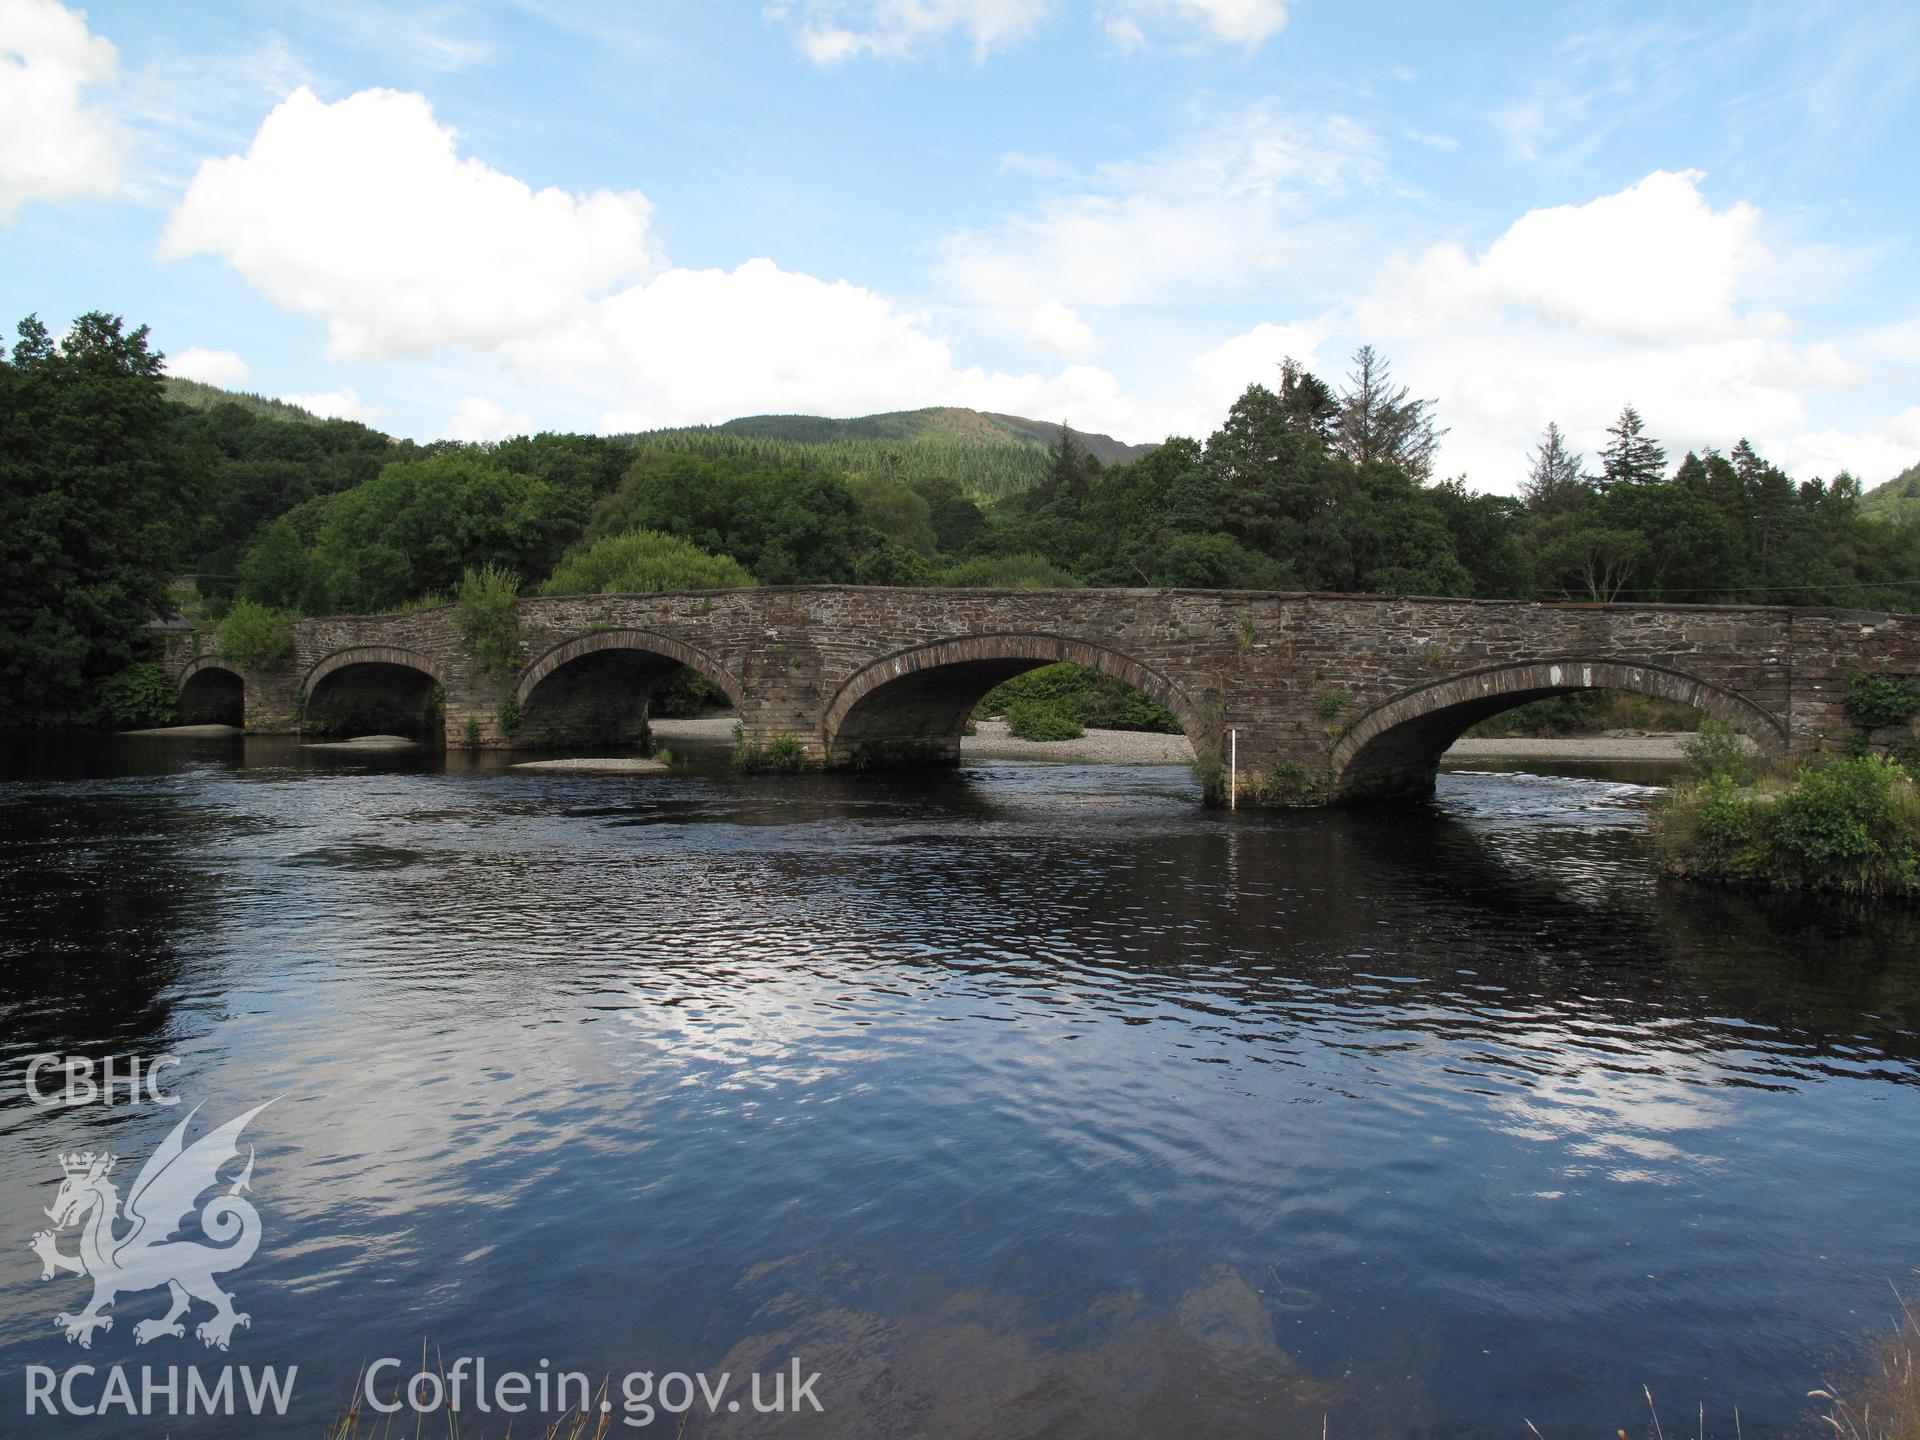 View of Llanelltyd Bridge from the south, taken by Brian Malaws on 05 August 2009.